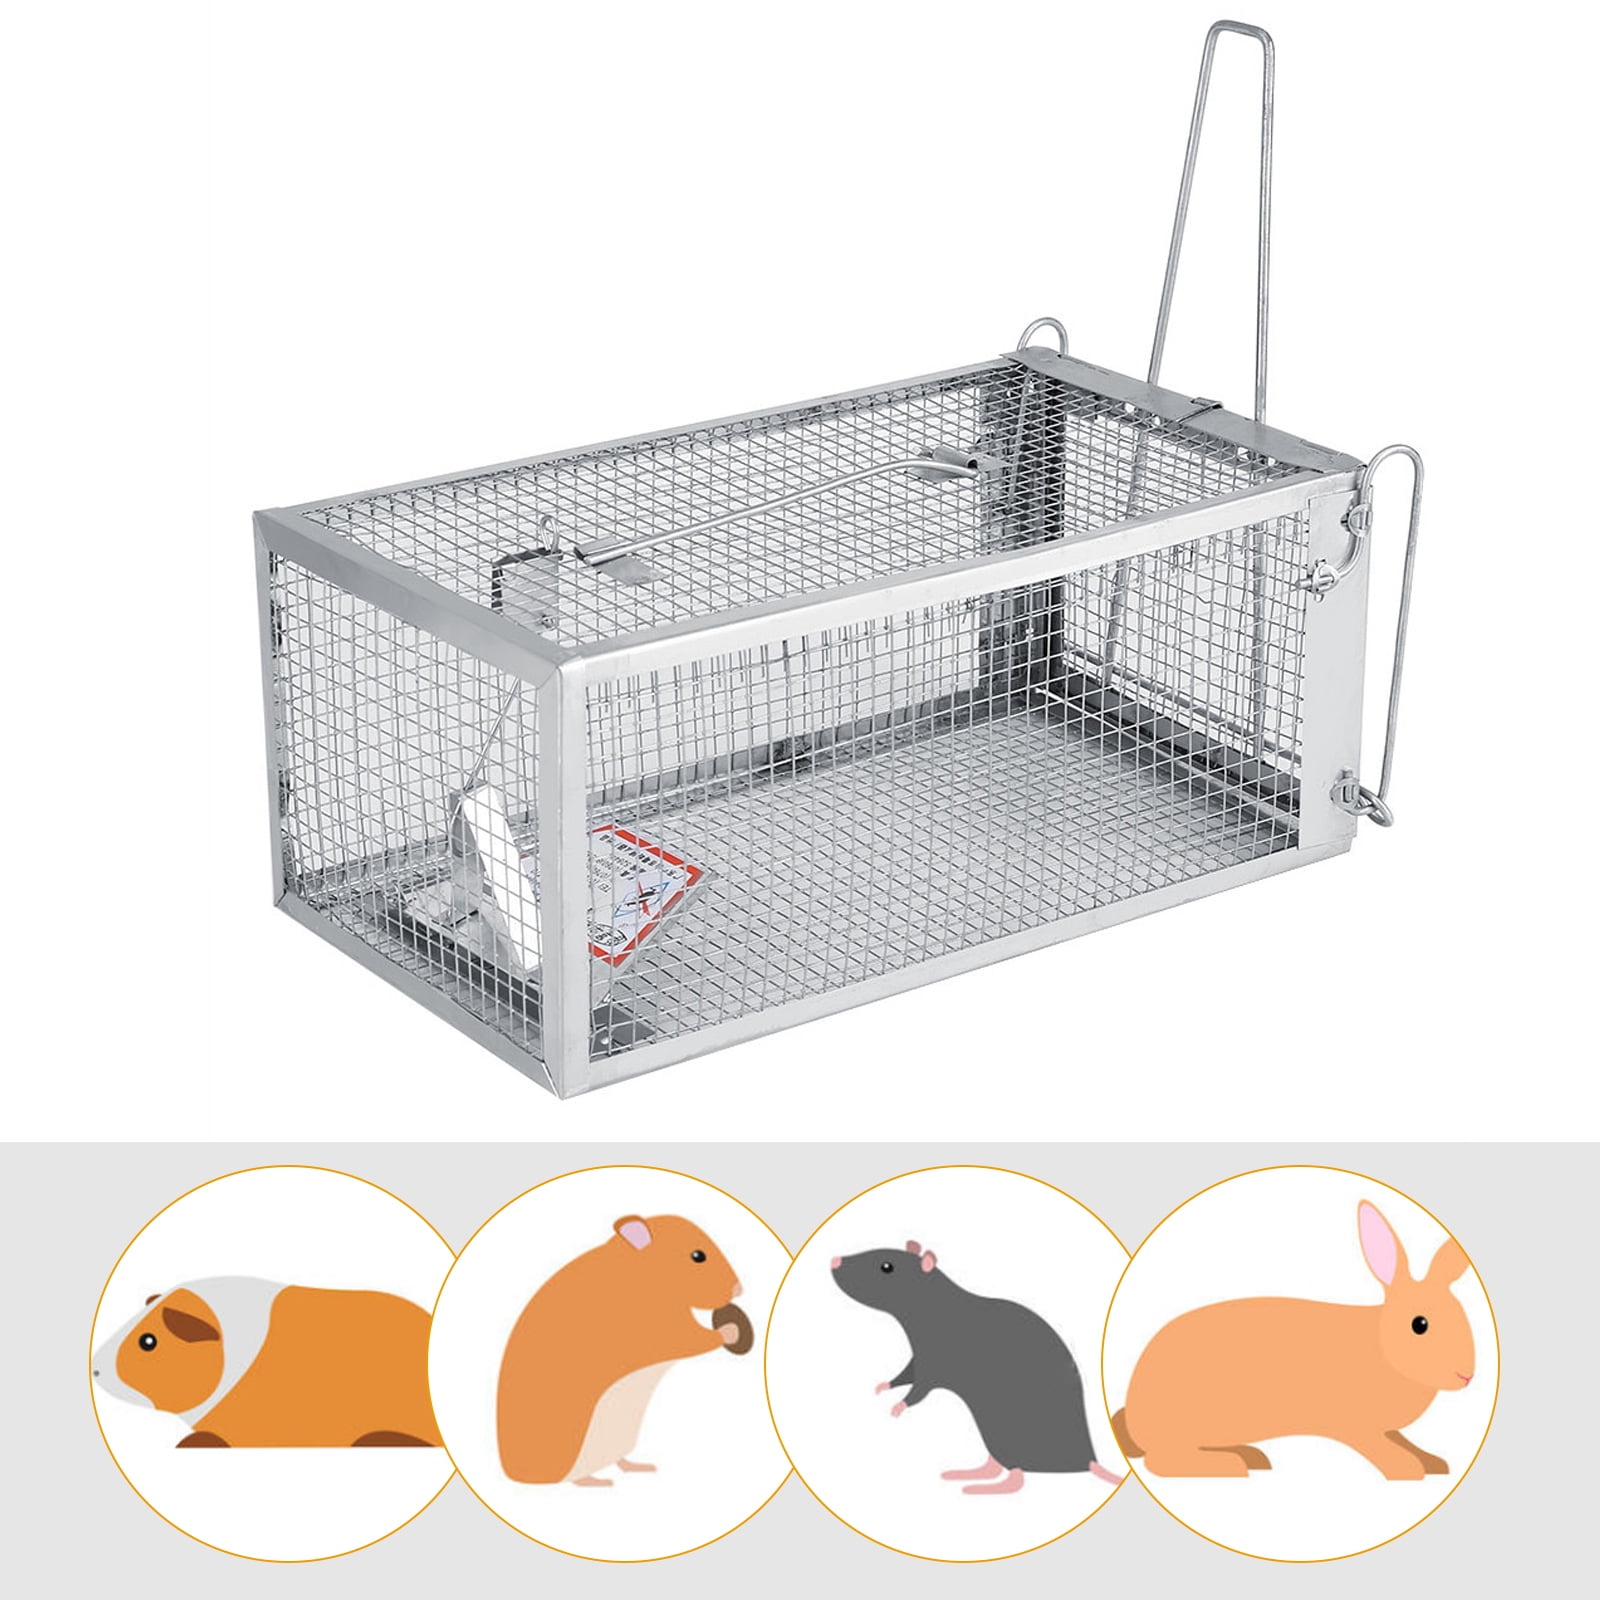 NEW GALVANISED STEEL RAT TRAP REUSABLE MICE MOUSE RODENT CATCH BAIT STRONG CAGE 